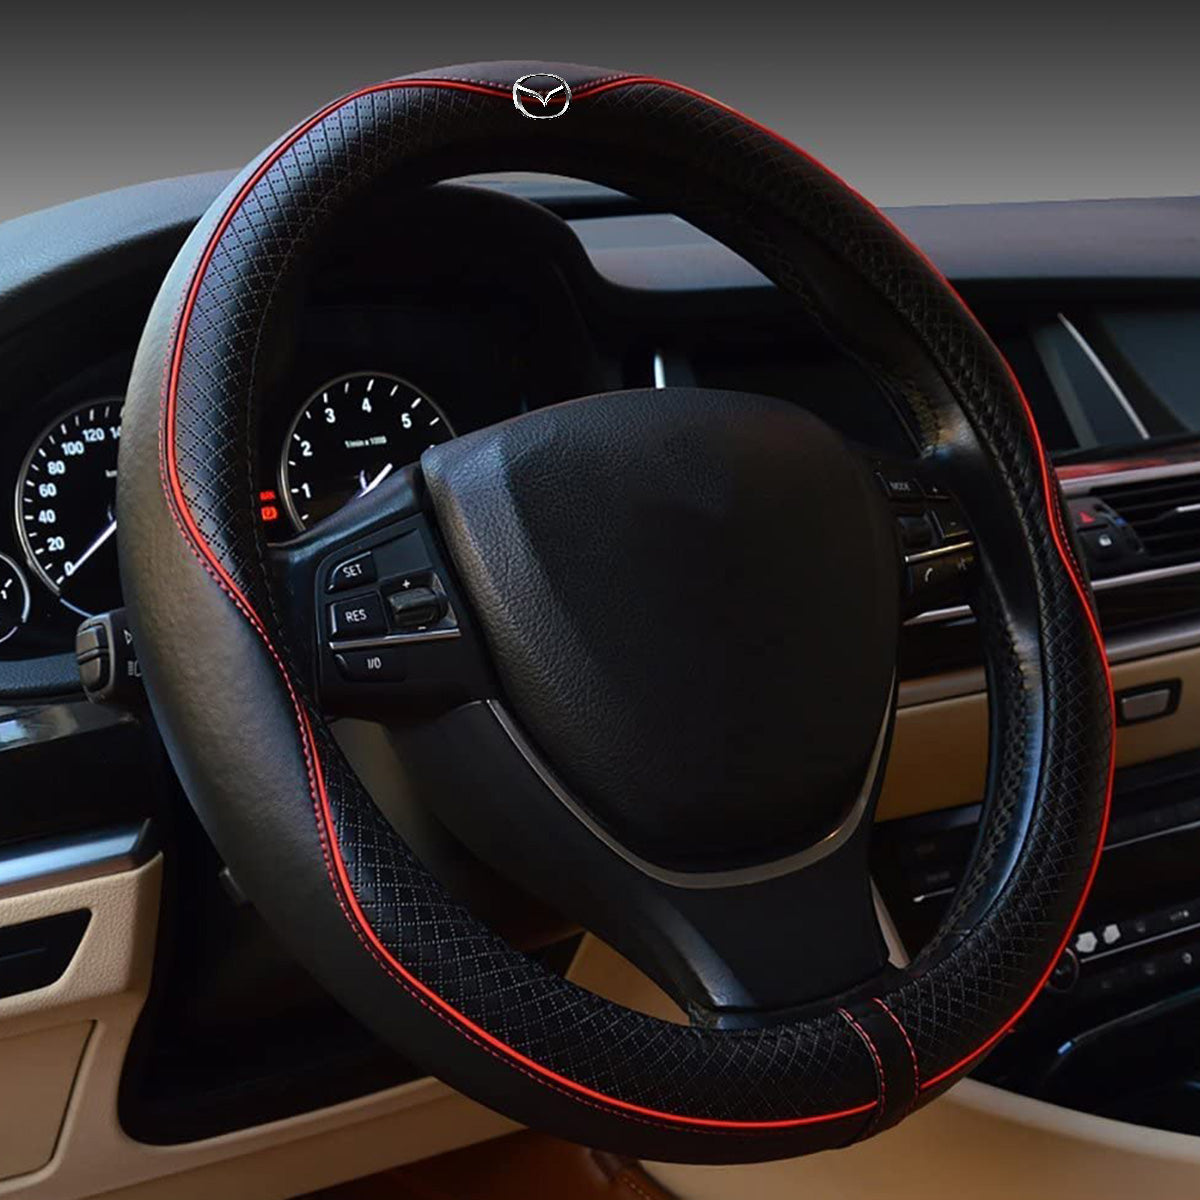 Car Steering Wheel Cover, Custom For Your Cars, Anti-Slip, Safety, Soft, Breathable, Heavy Duty, Thick, Full Surround, Sports Style, Car Accessories MA18990